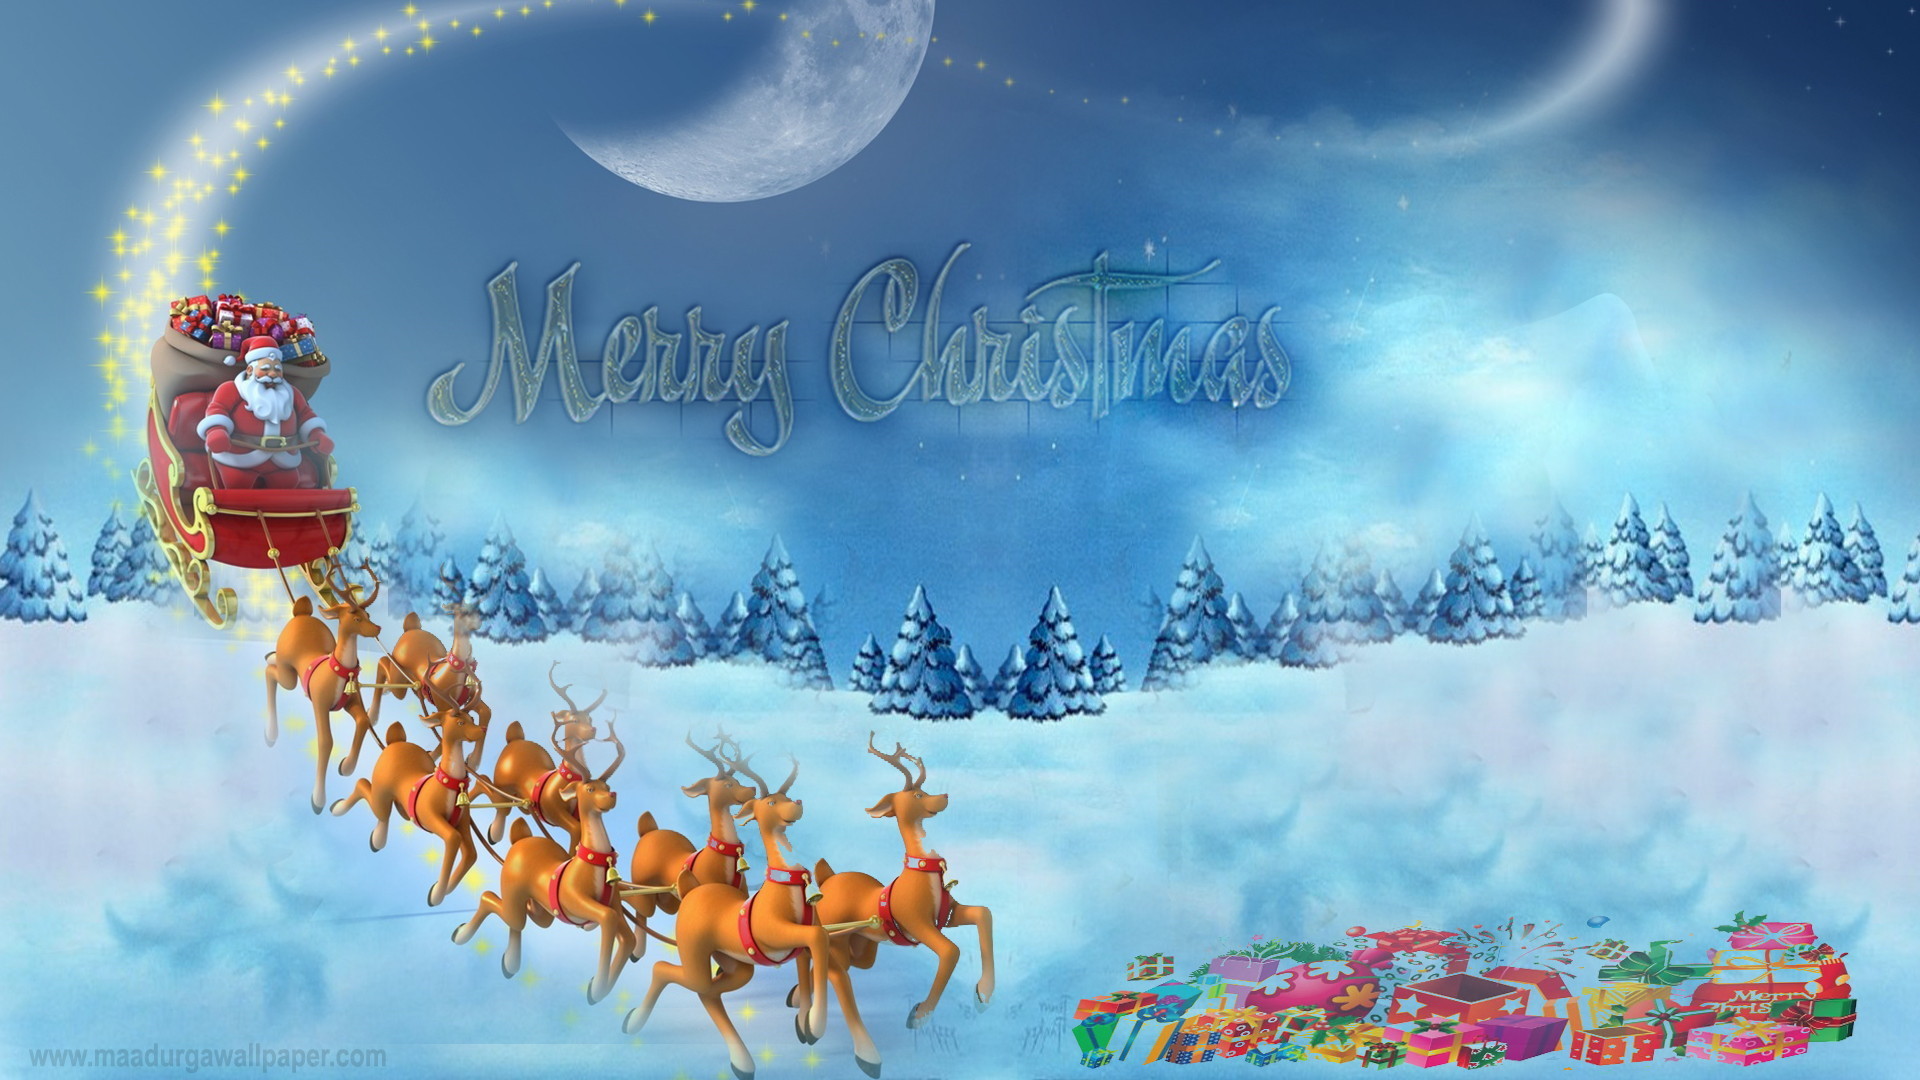 Christmas wallpapers free, beautiful pictures hd images download free for tablet, laptop